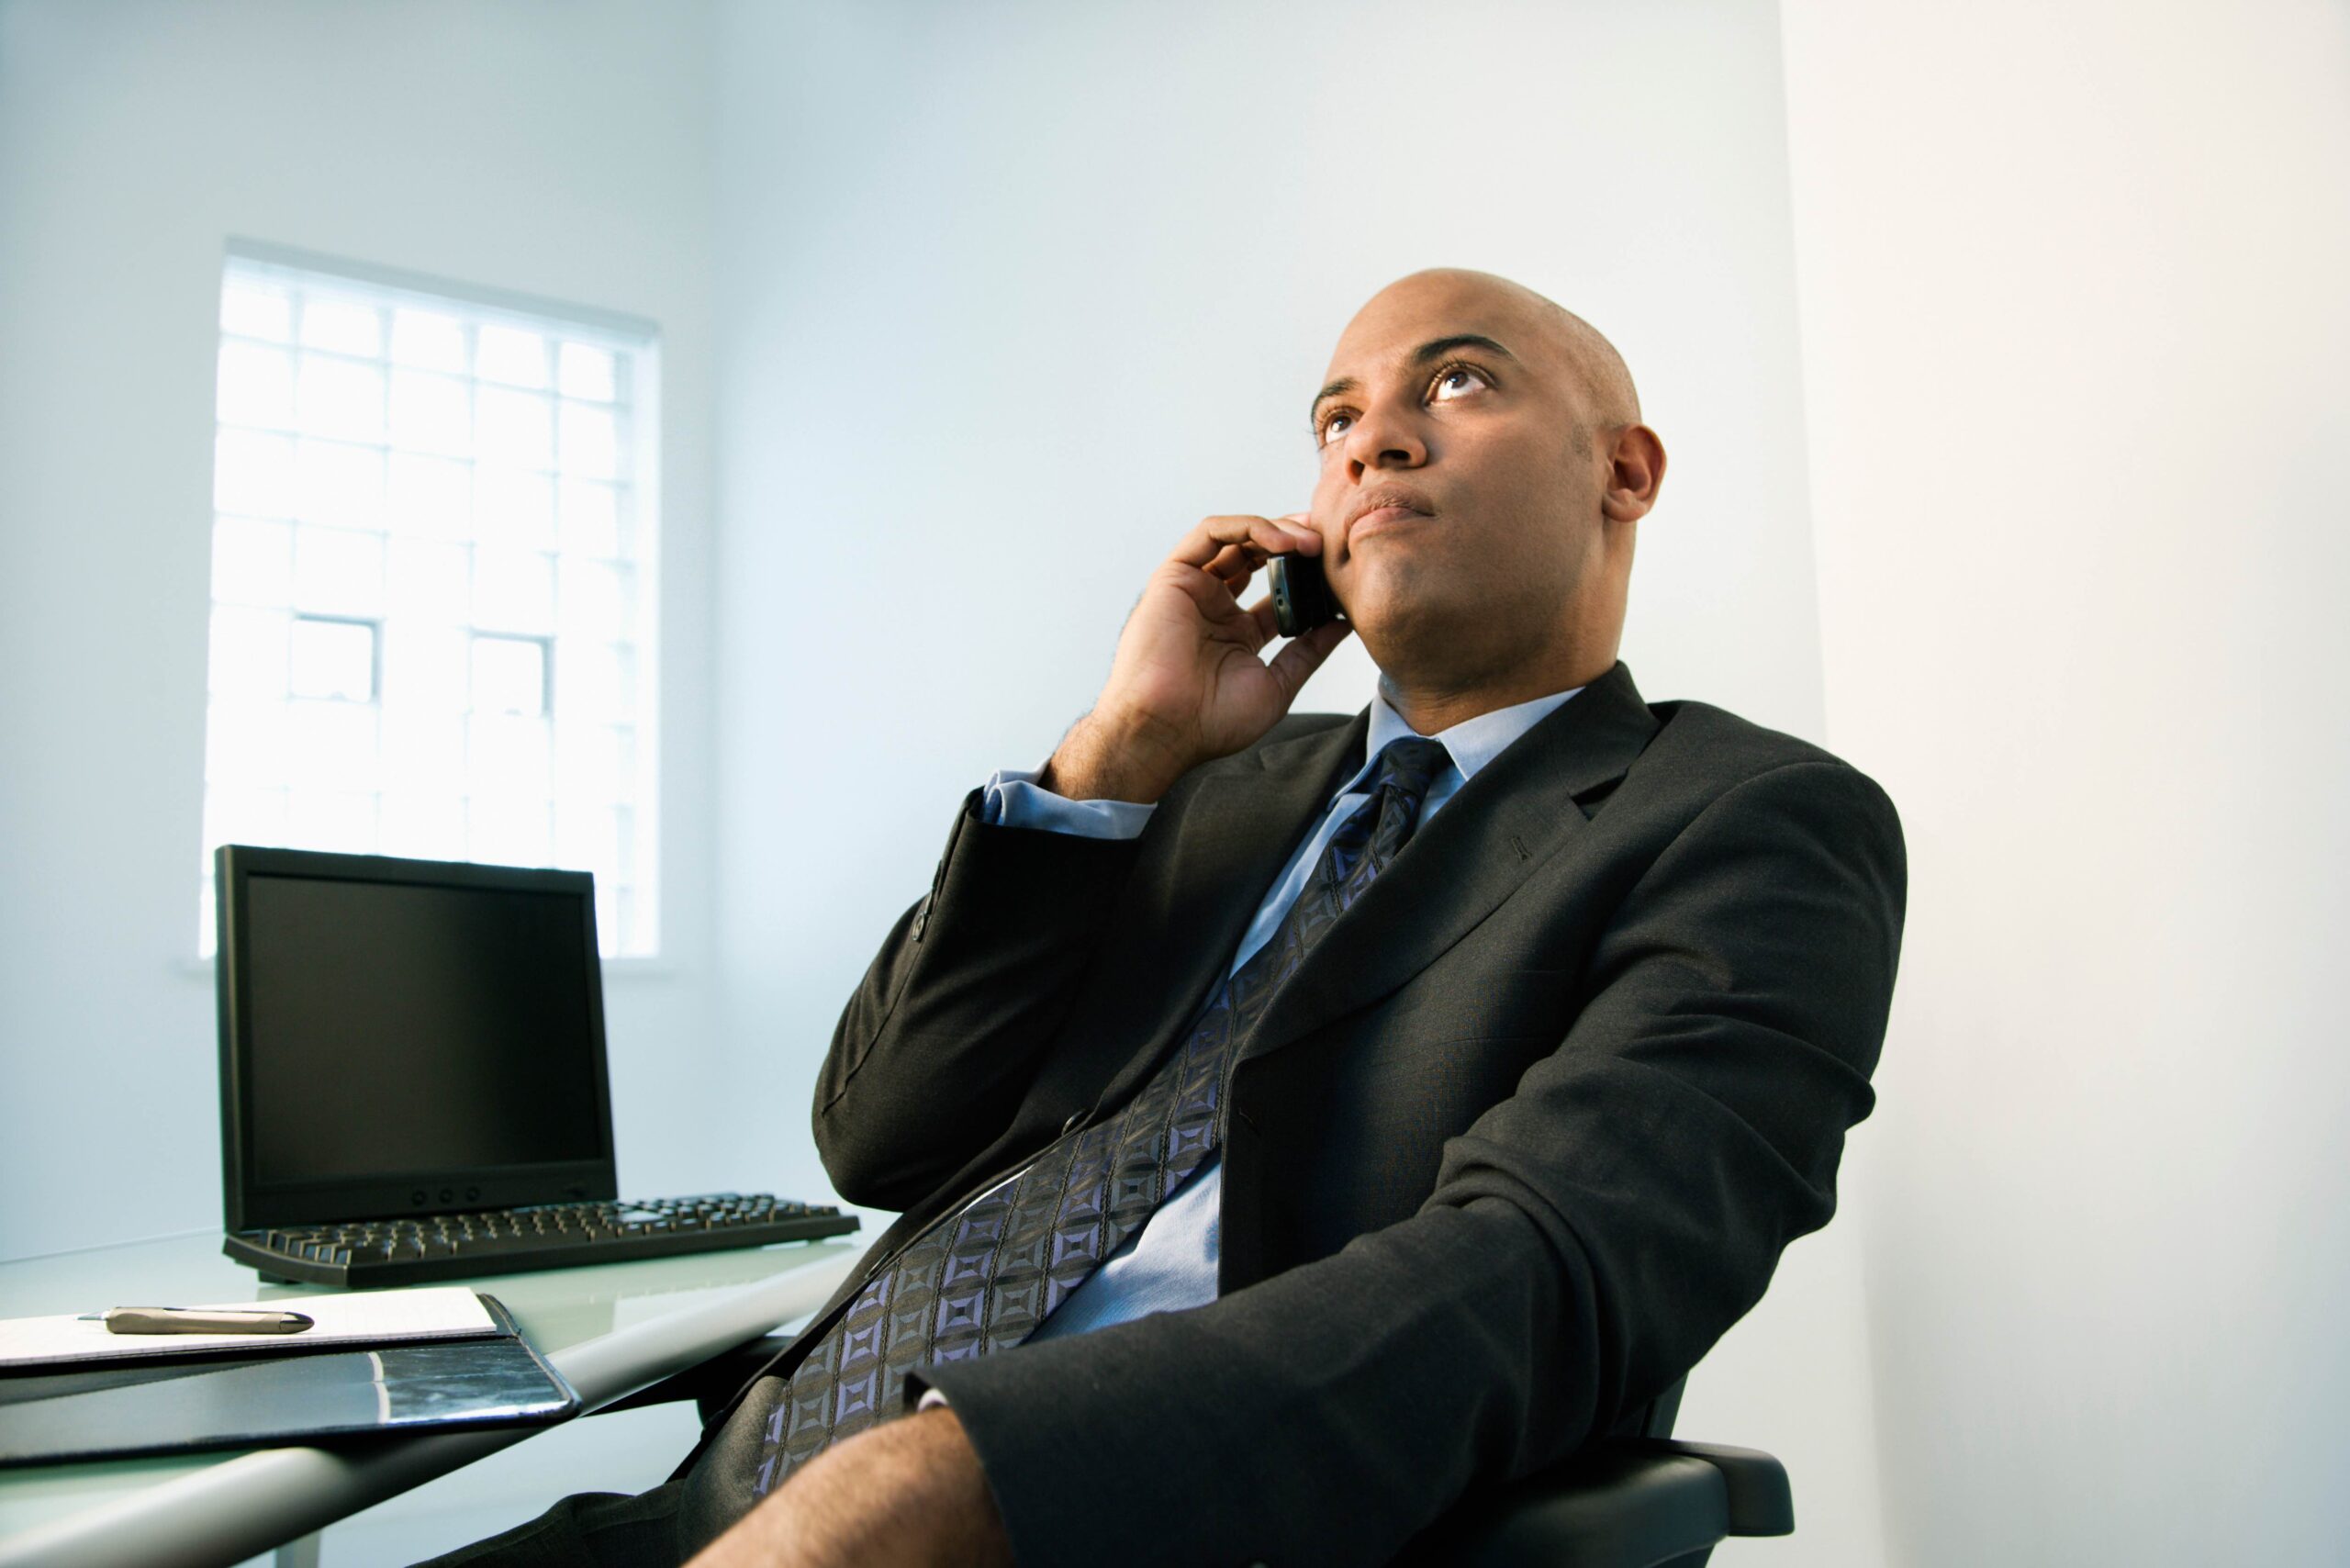 Cold Calling is Dead. Refine Your Sales Processes with the Help of a Sales Consulting Firm